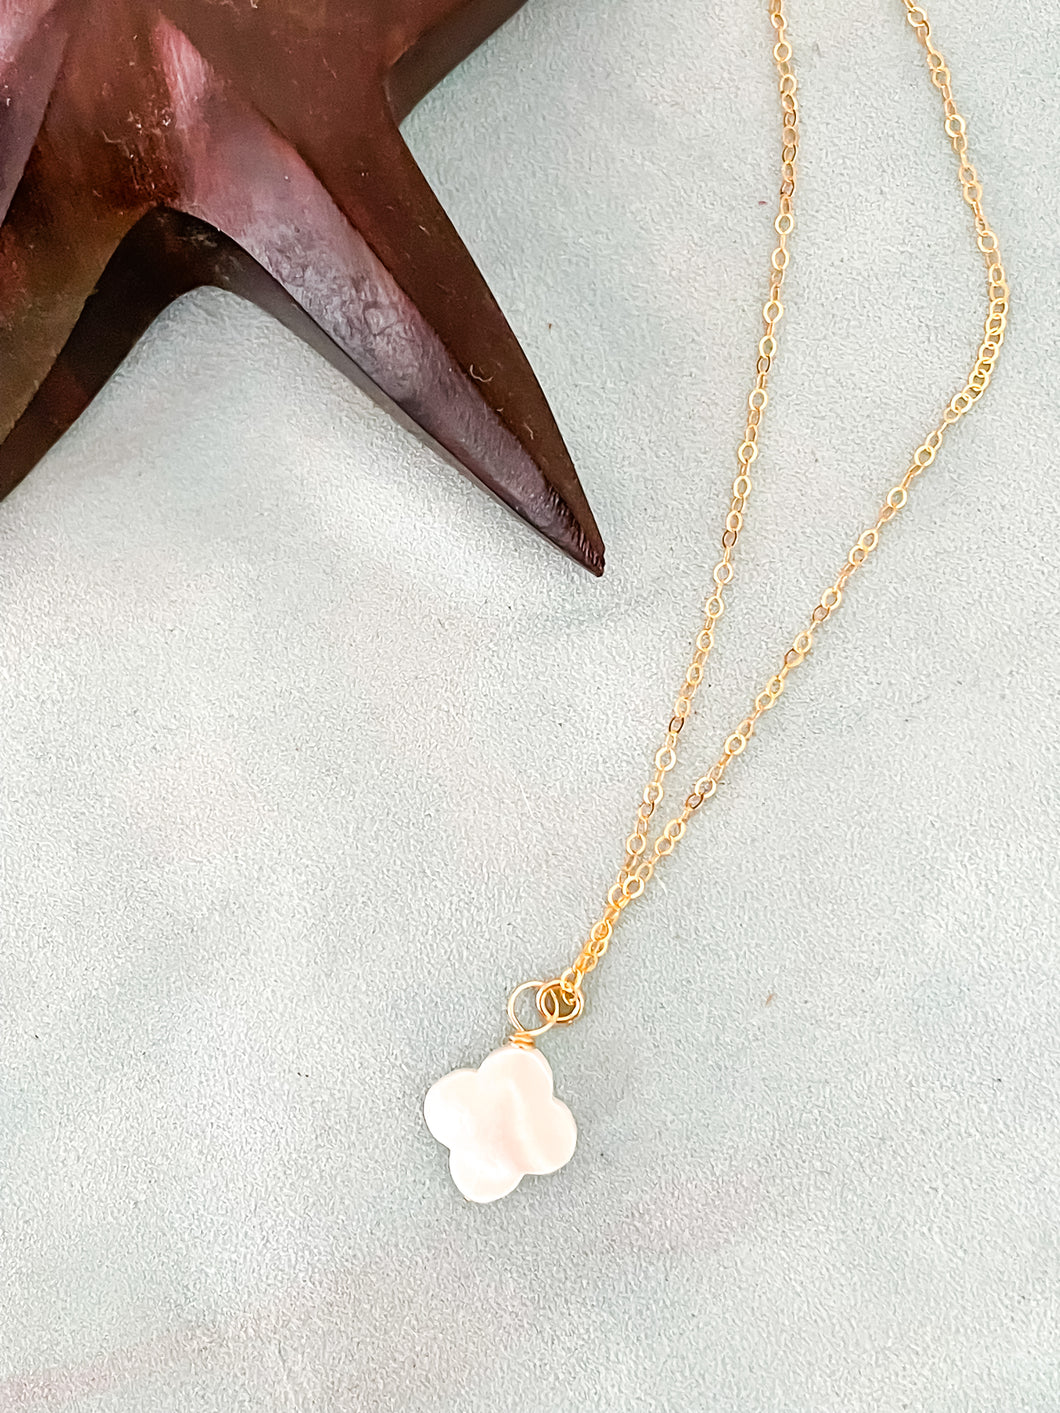 The Mother of Pearl Quatrefoil Necklace